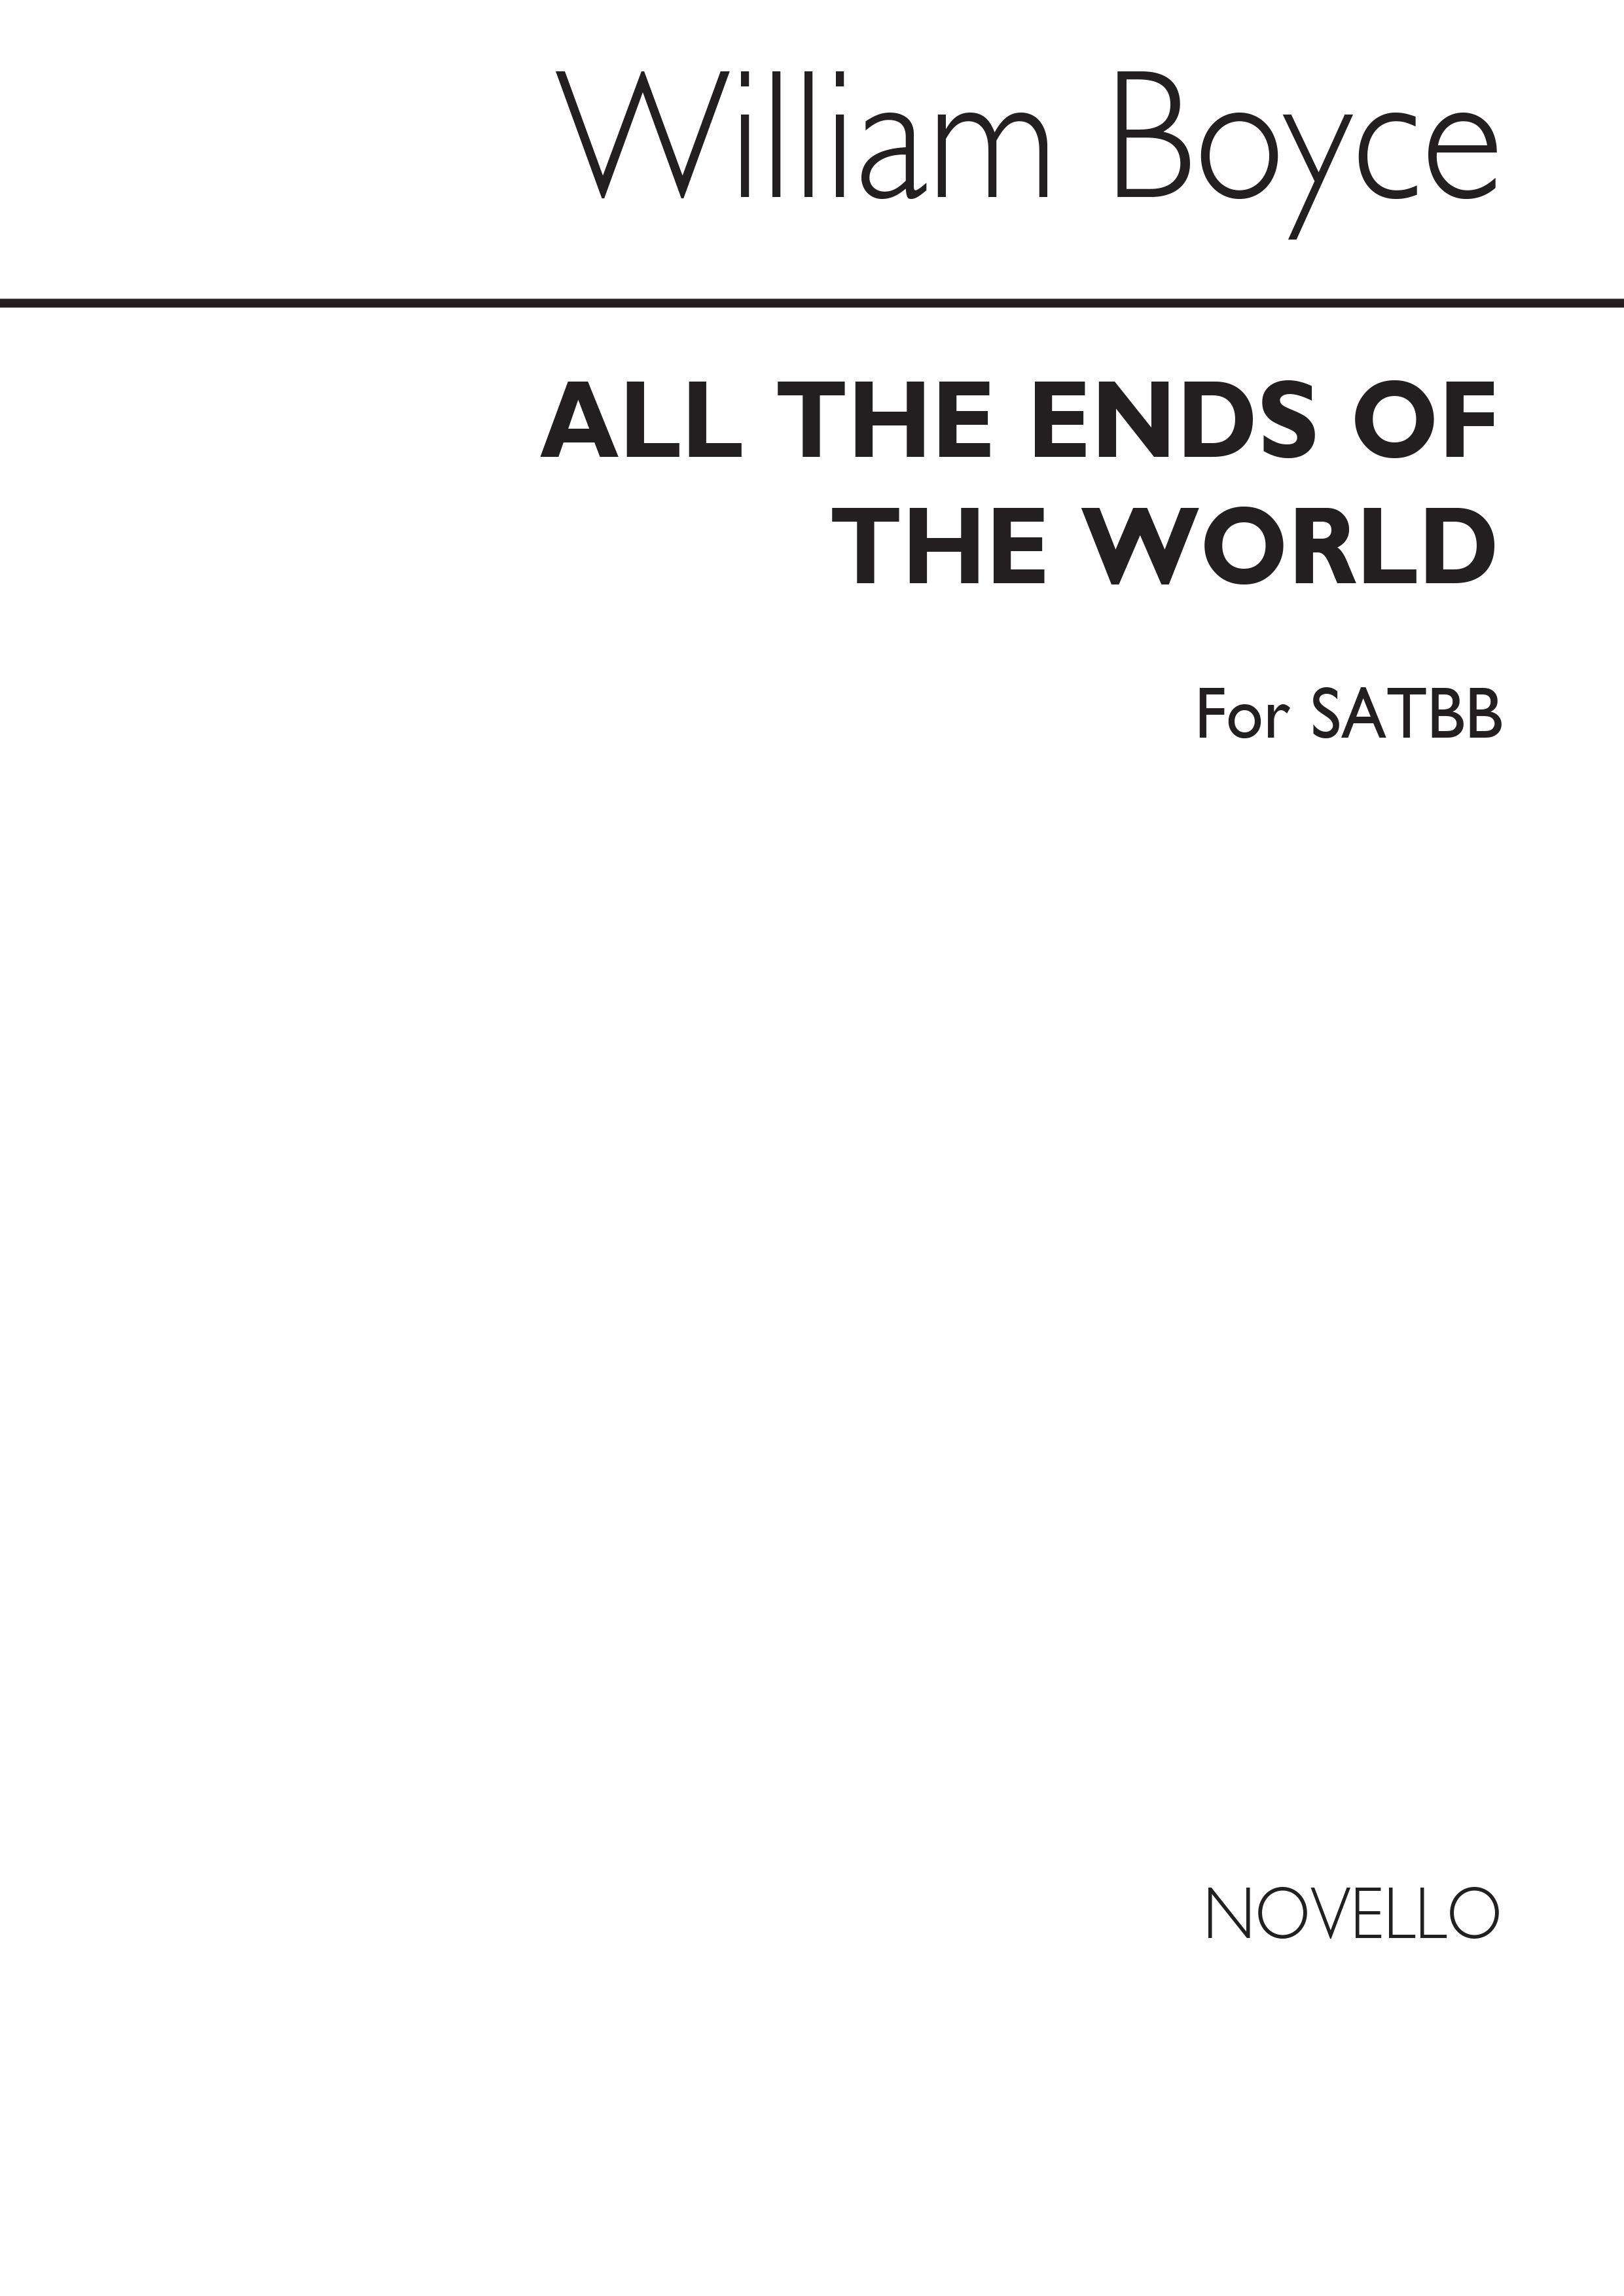 William Boyce: All The Ends Of The World (SATBB)